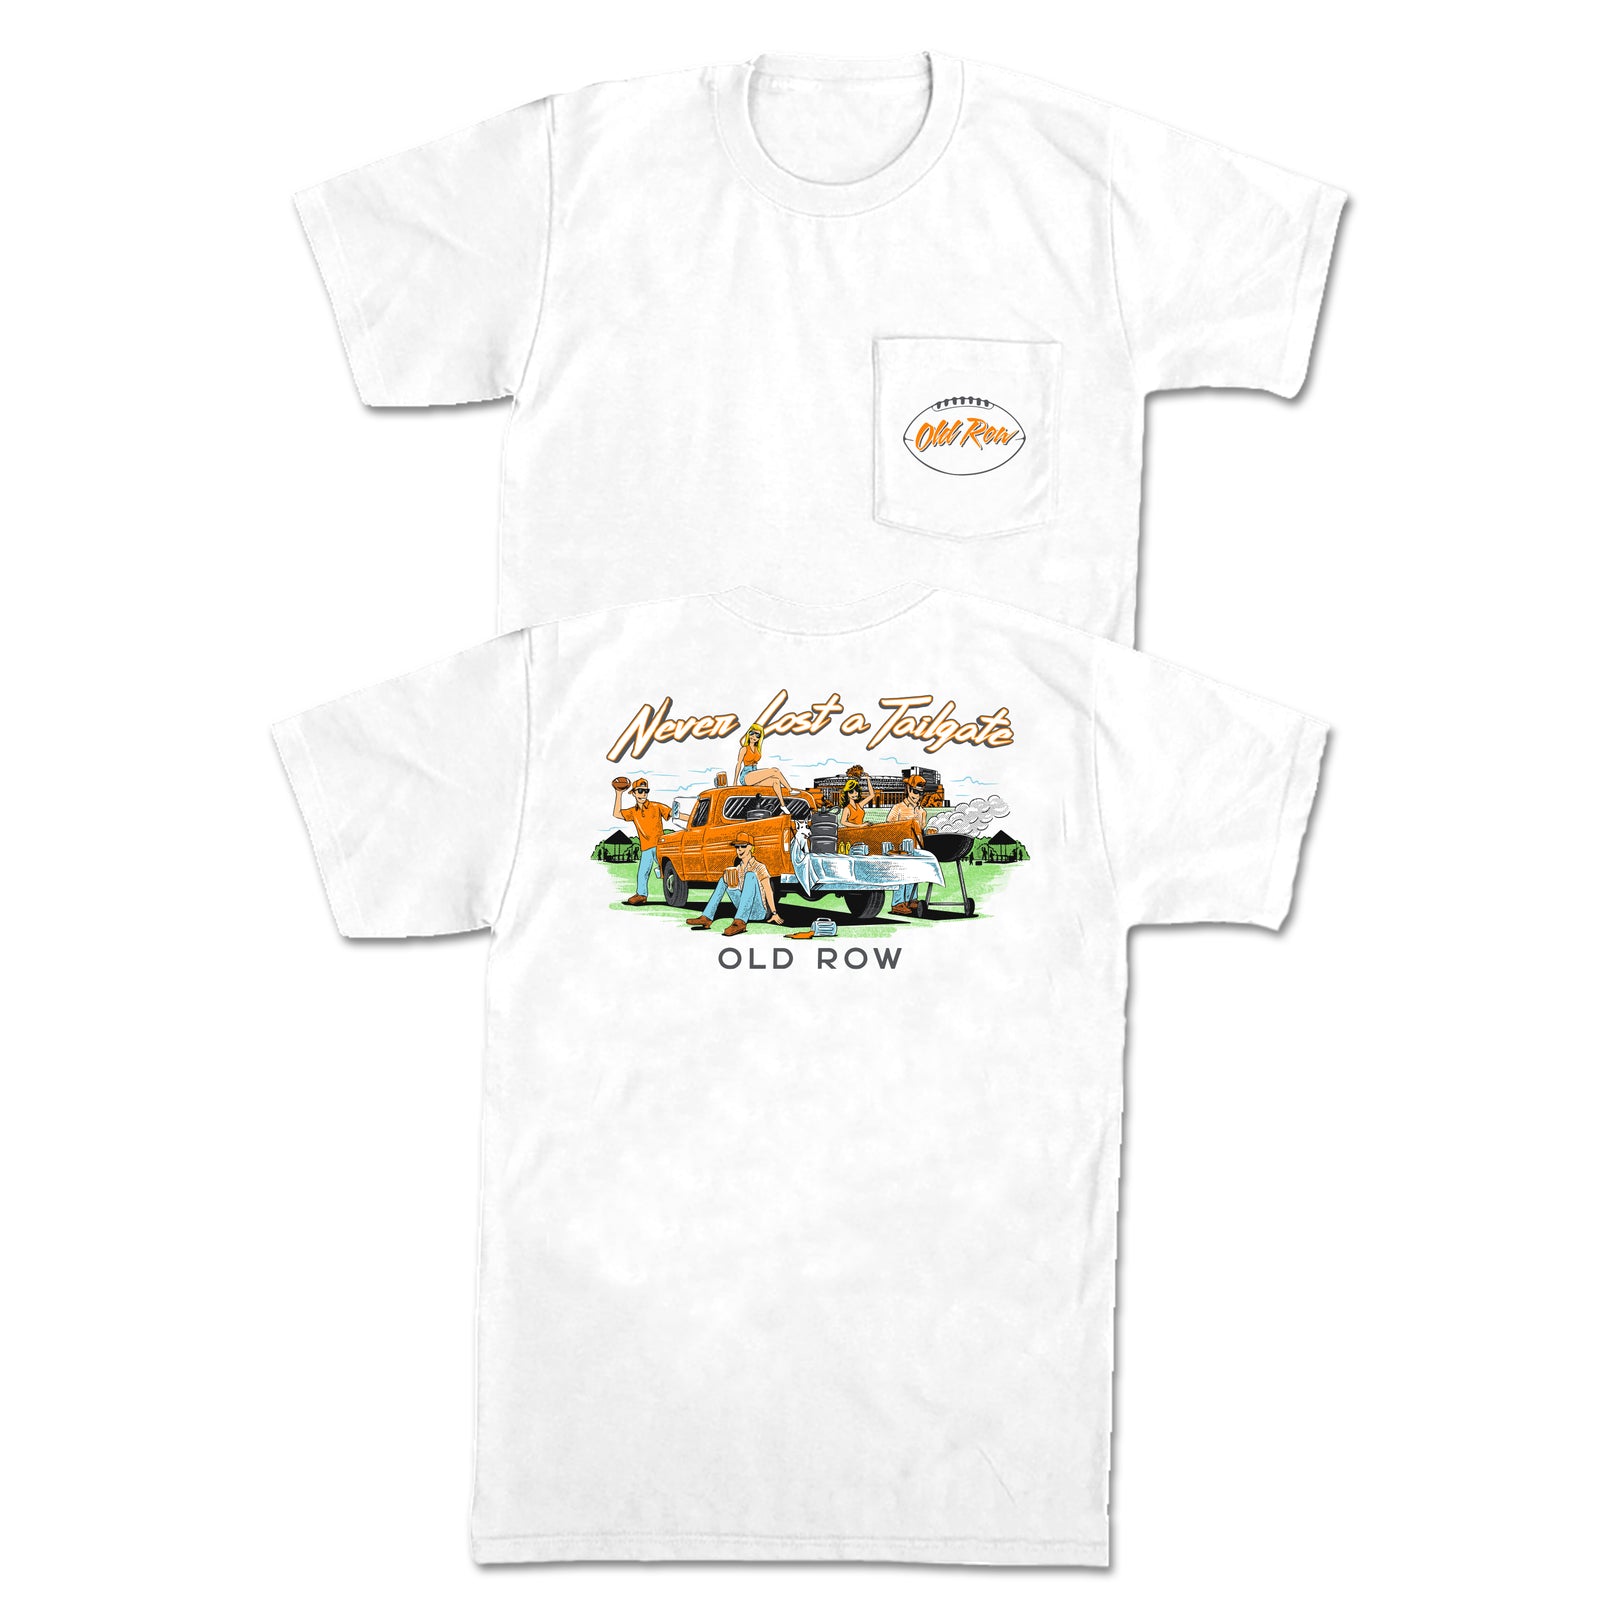 Never Lost A Tailgate Knoxville Pocket Tee